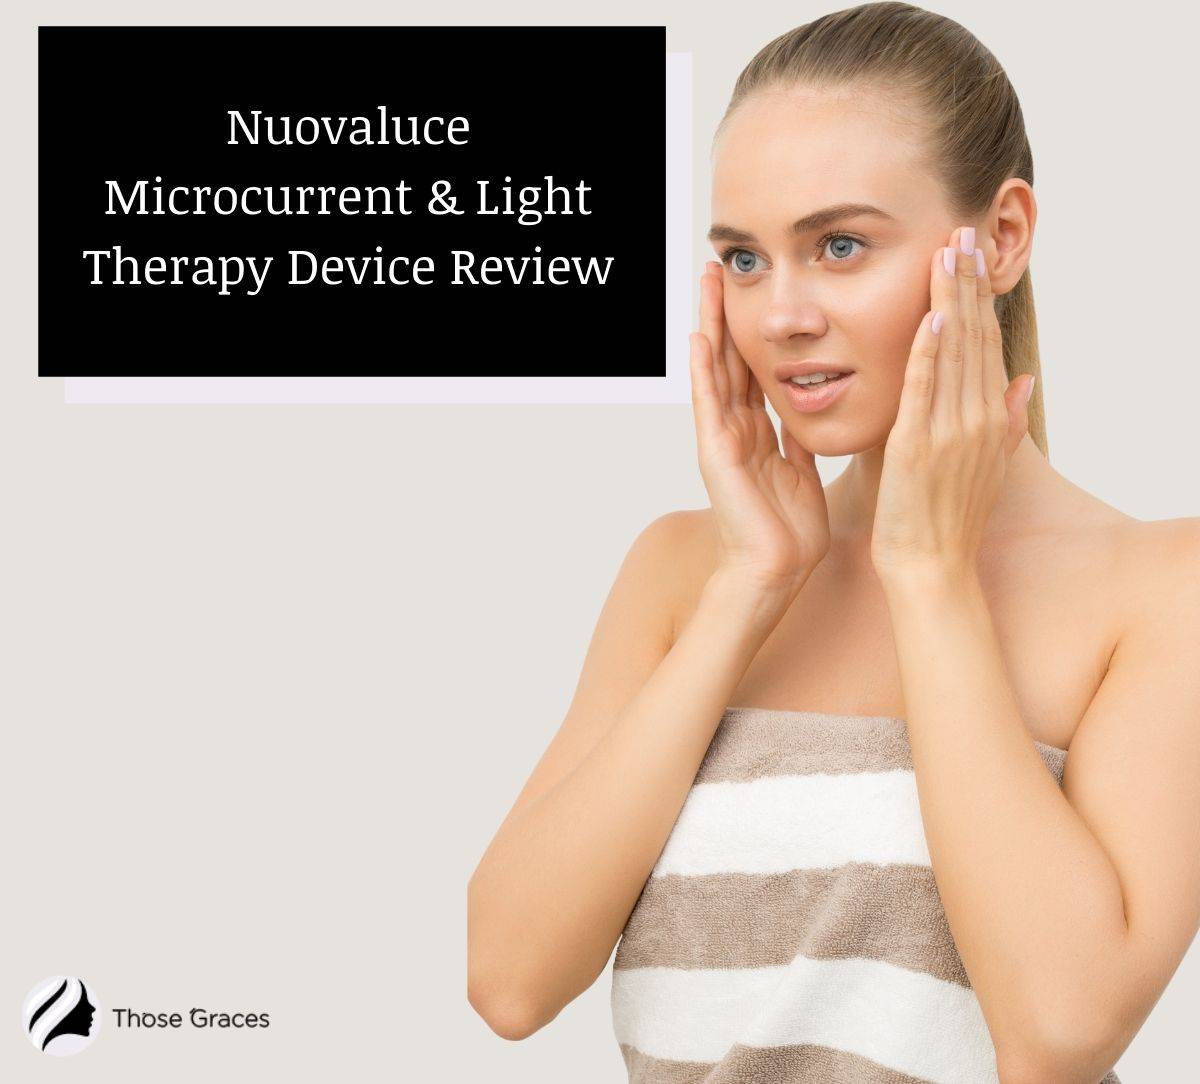 lady holding her face using nuovaluce microcurrent & light therapy device